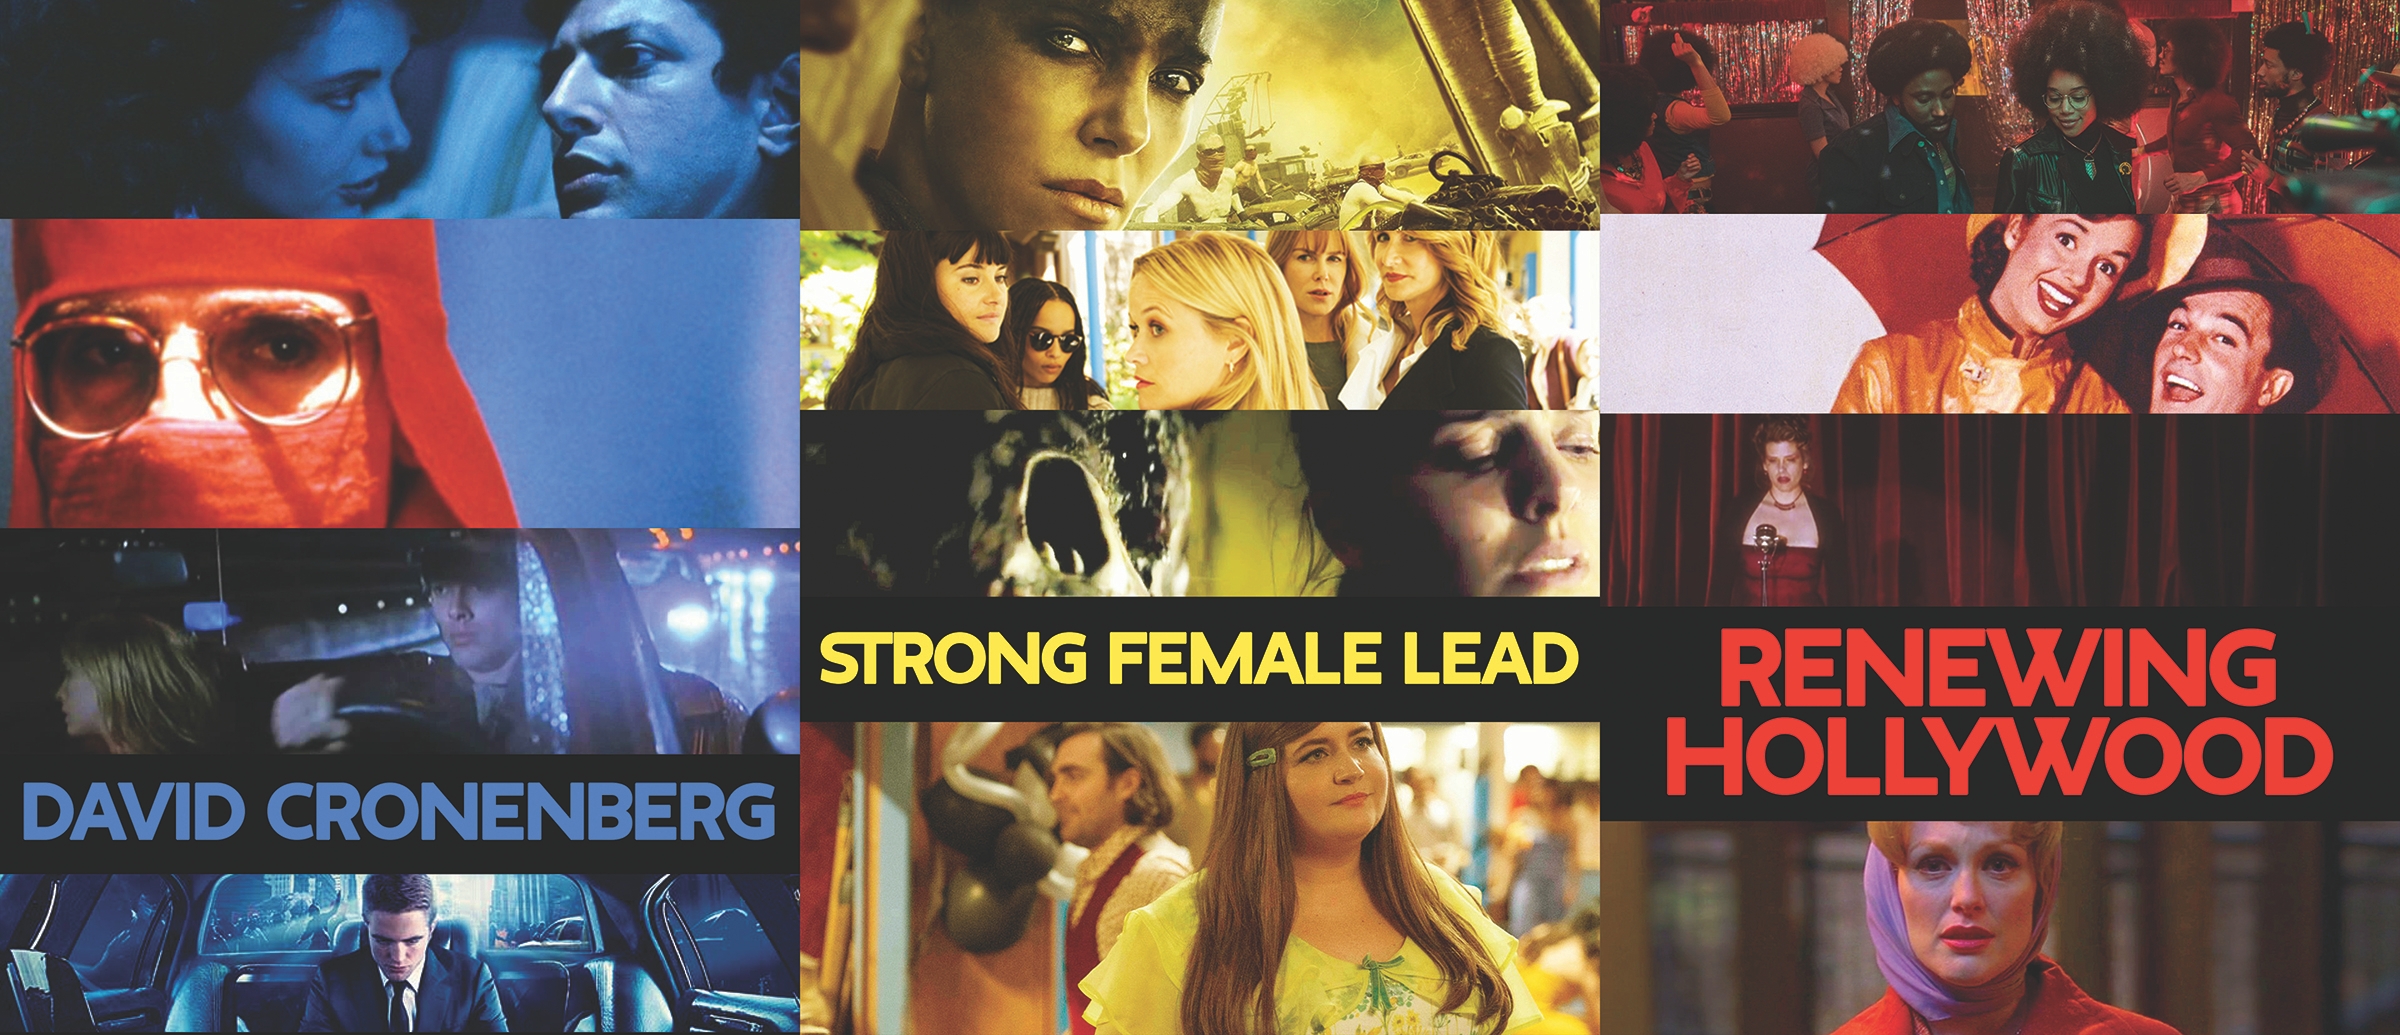 Images from the Summer 2020 courses in the Department of Cinema studies, including stills and images for "David Cronenberg," "Strong Female Lead," and "Renewing Hollywood."